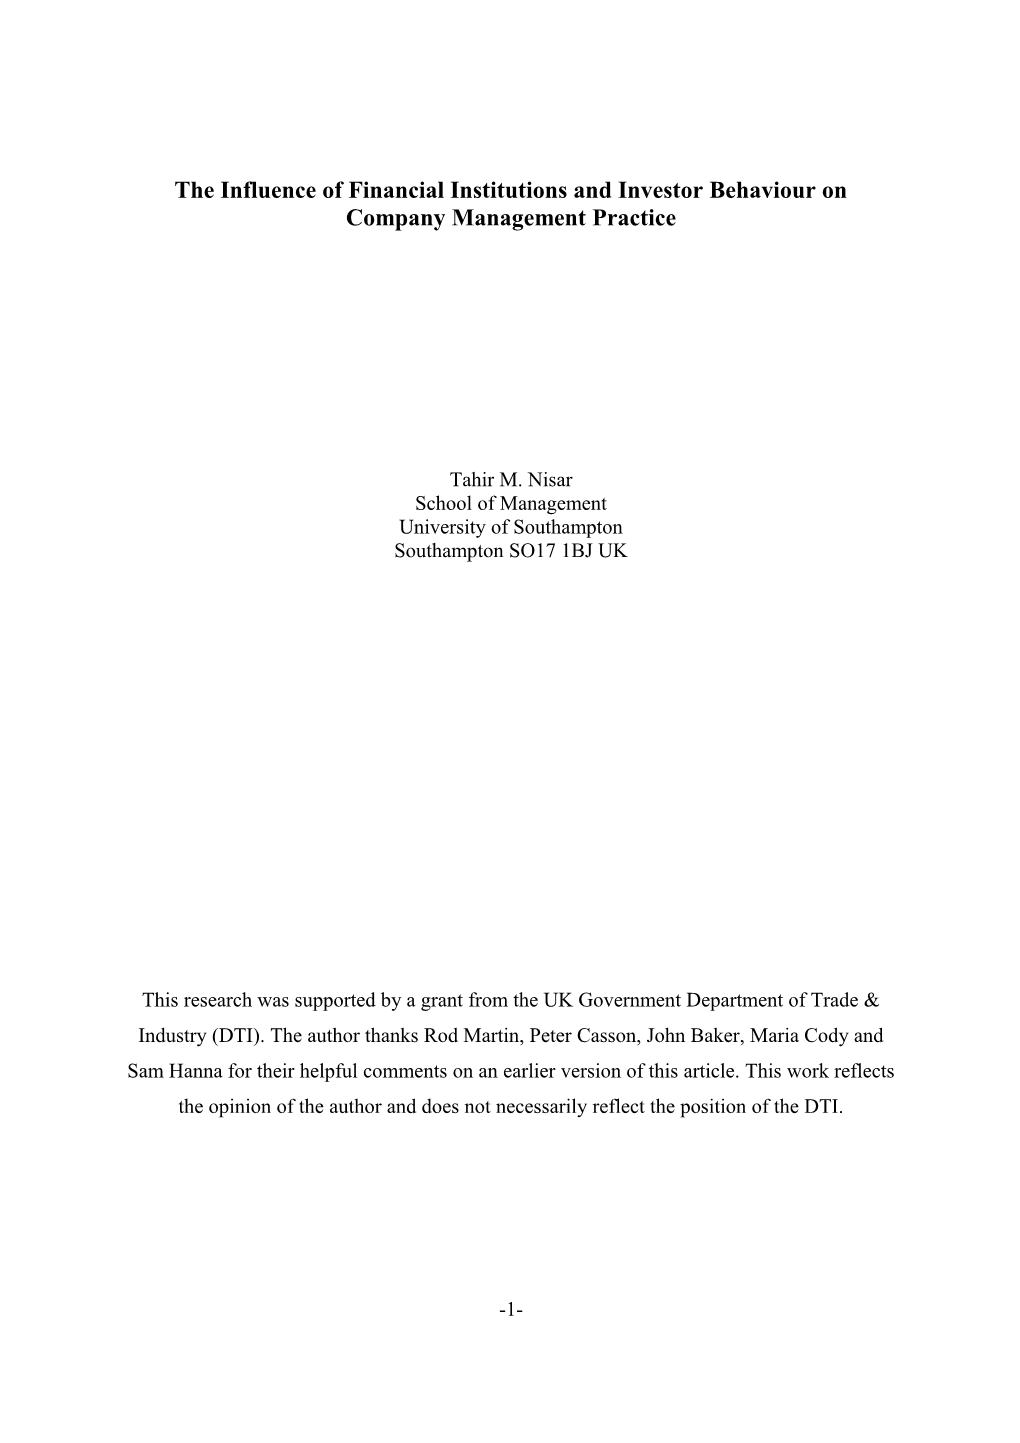 The Influence of Financial Institutions and Investor Behaviour on Company Management Practice